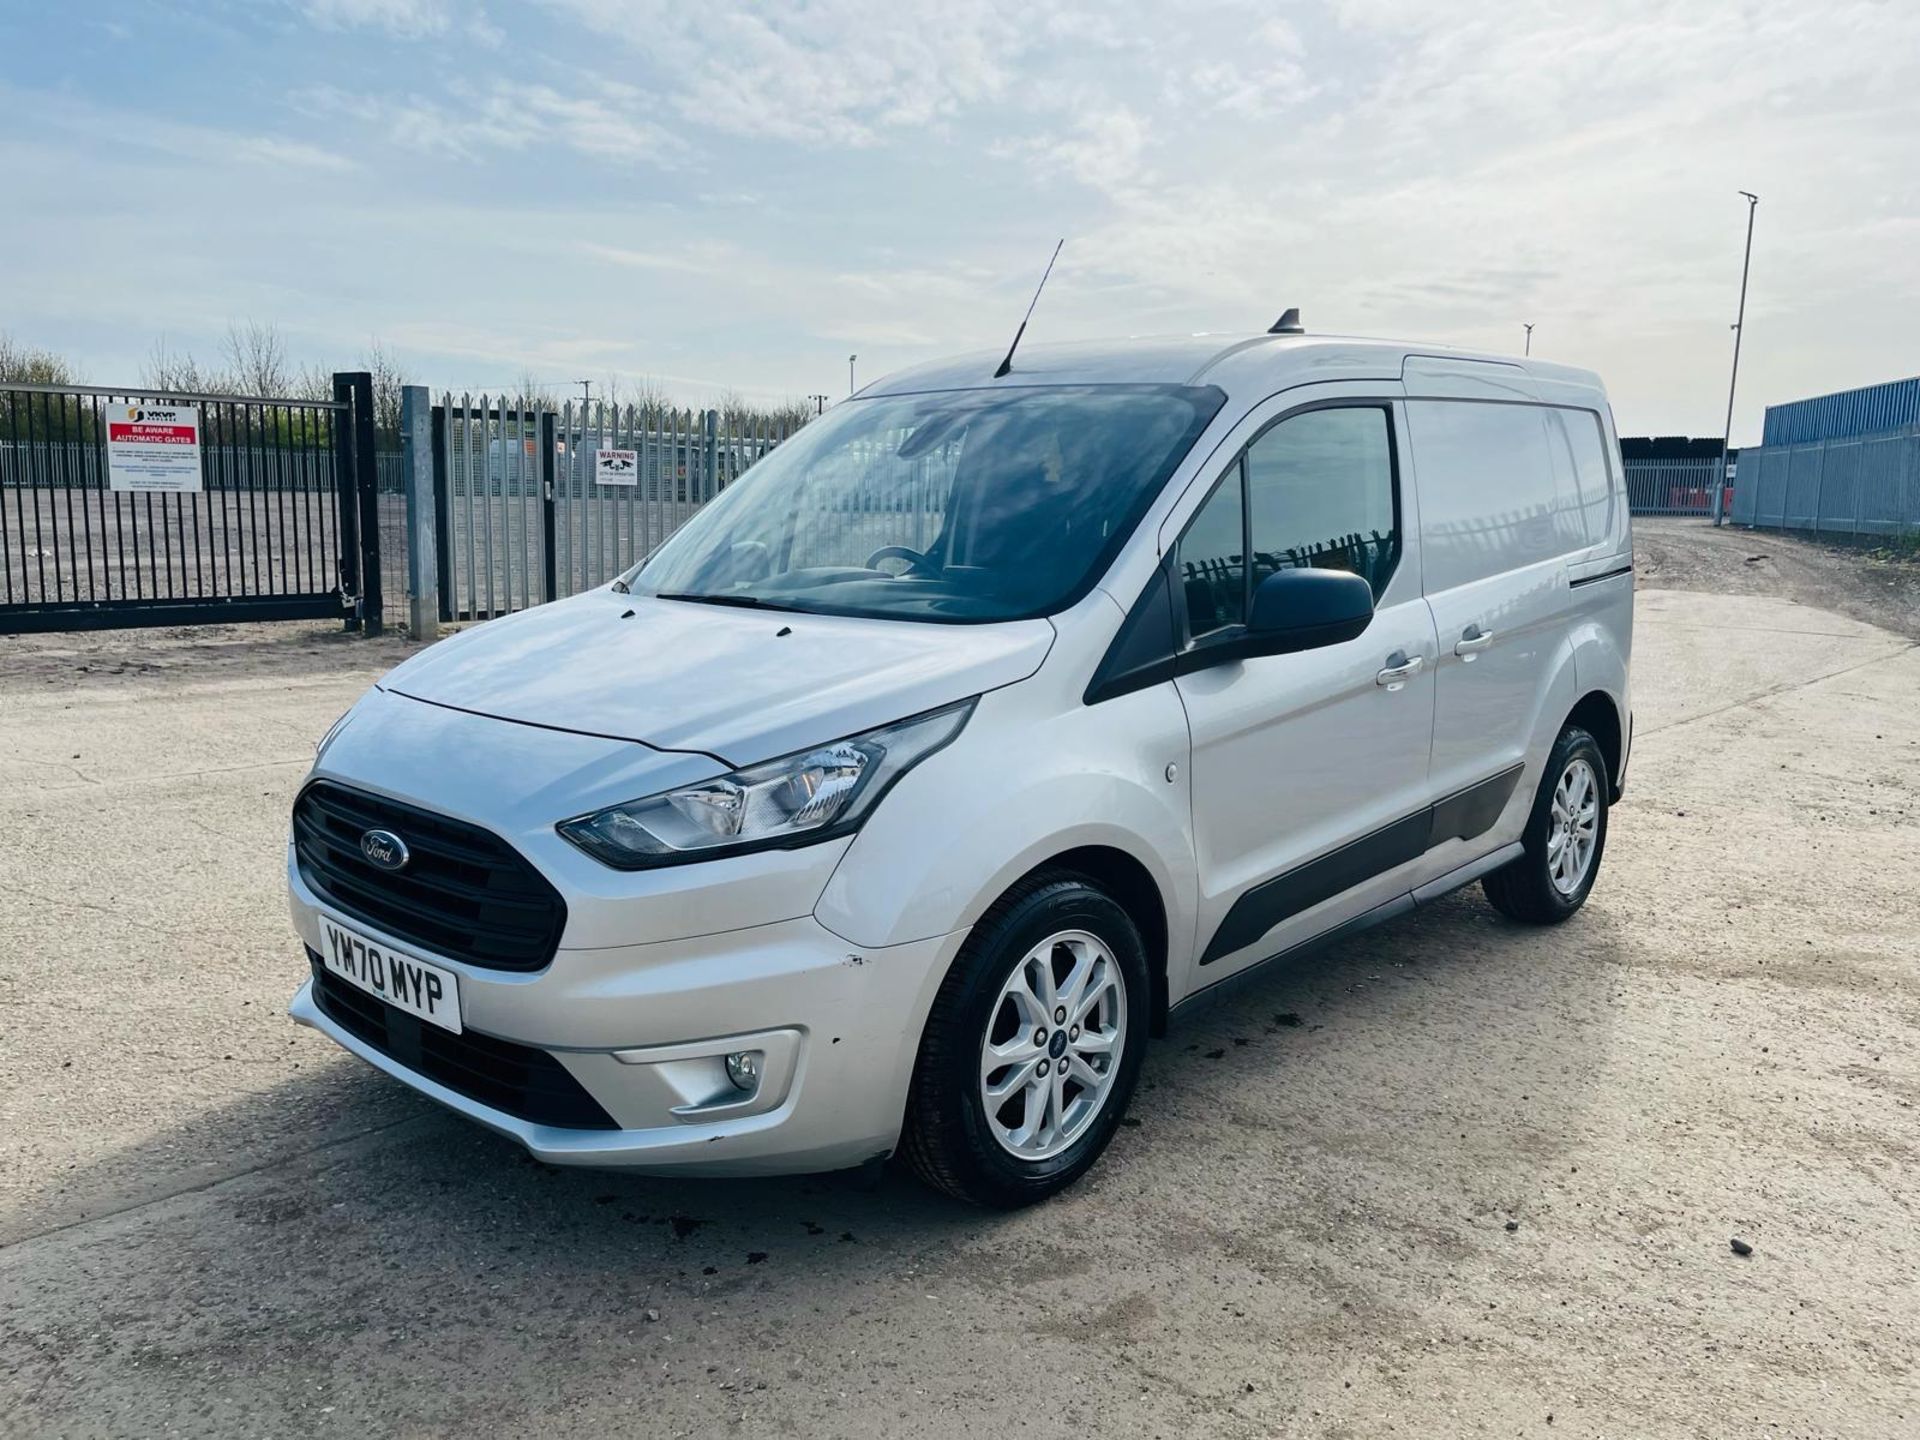 Ford Transit Connect 1.5 TDCI L1H1-2020 '70 Reg'- 1 Previous Owner -Alloy Wheels -Sat Nav - A/C - Image 3 of 28